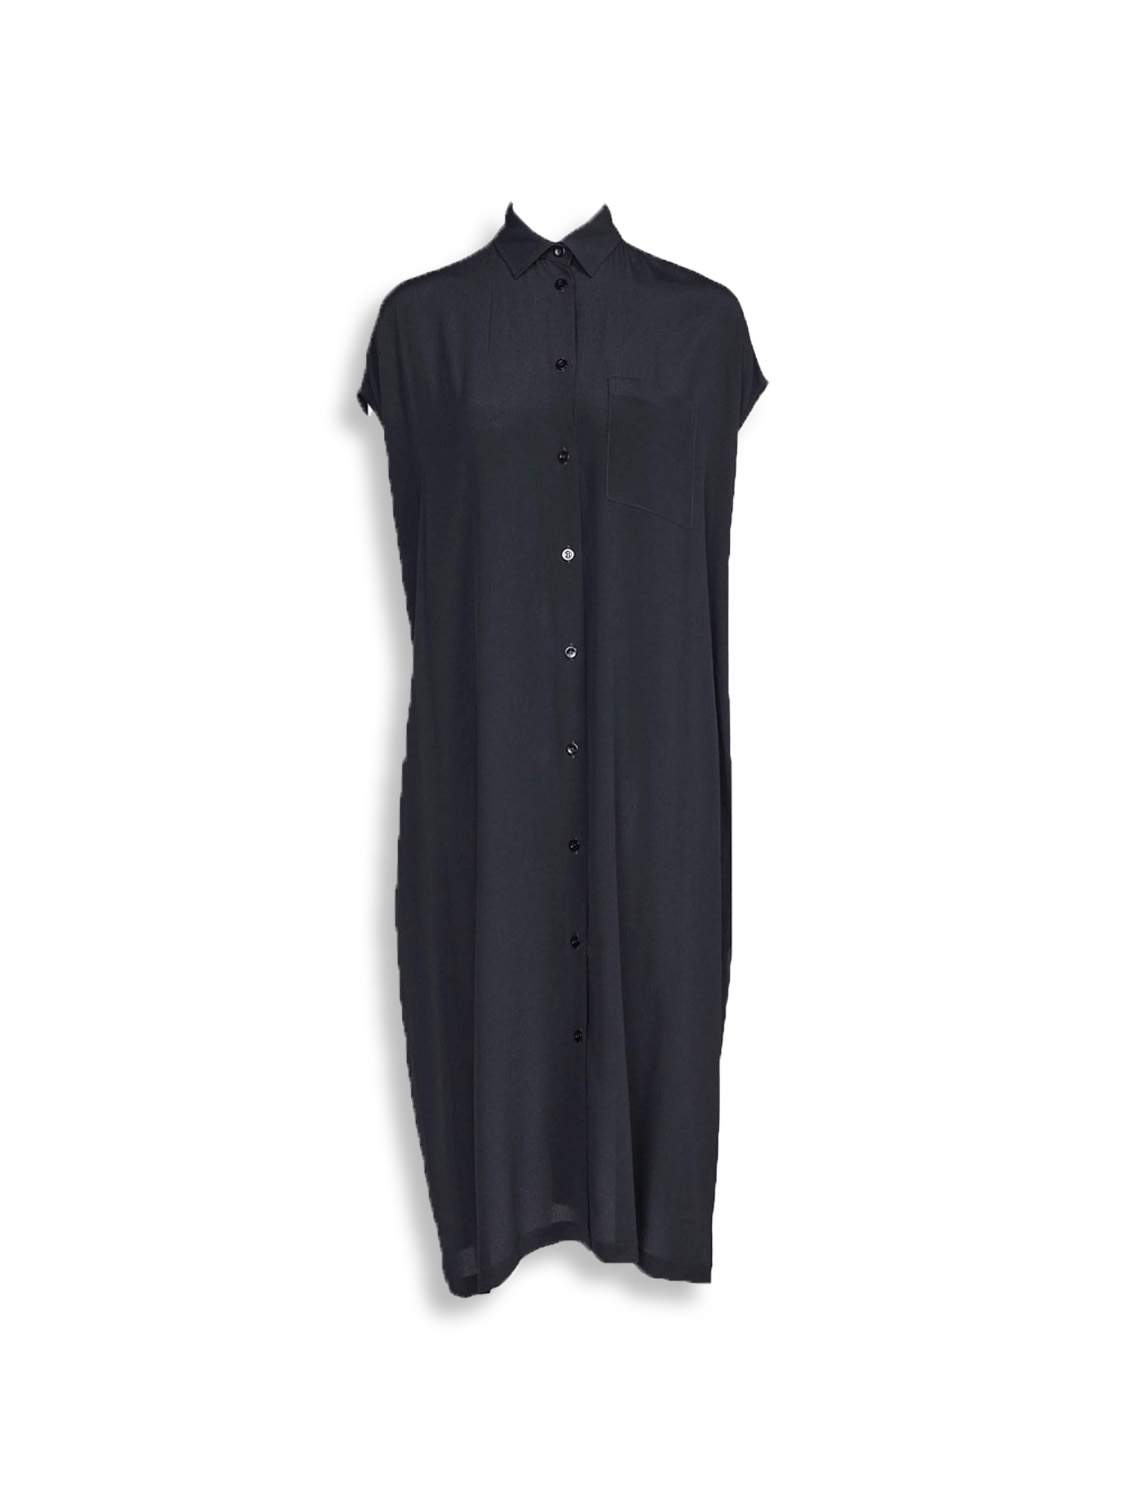 Short sleeve midi dress with full length button placket